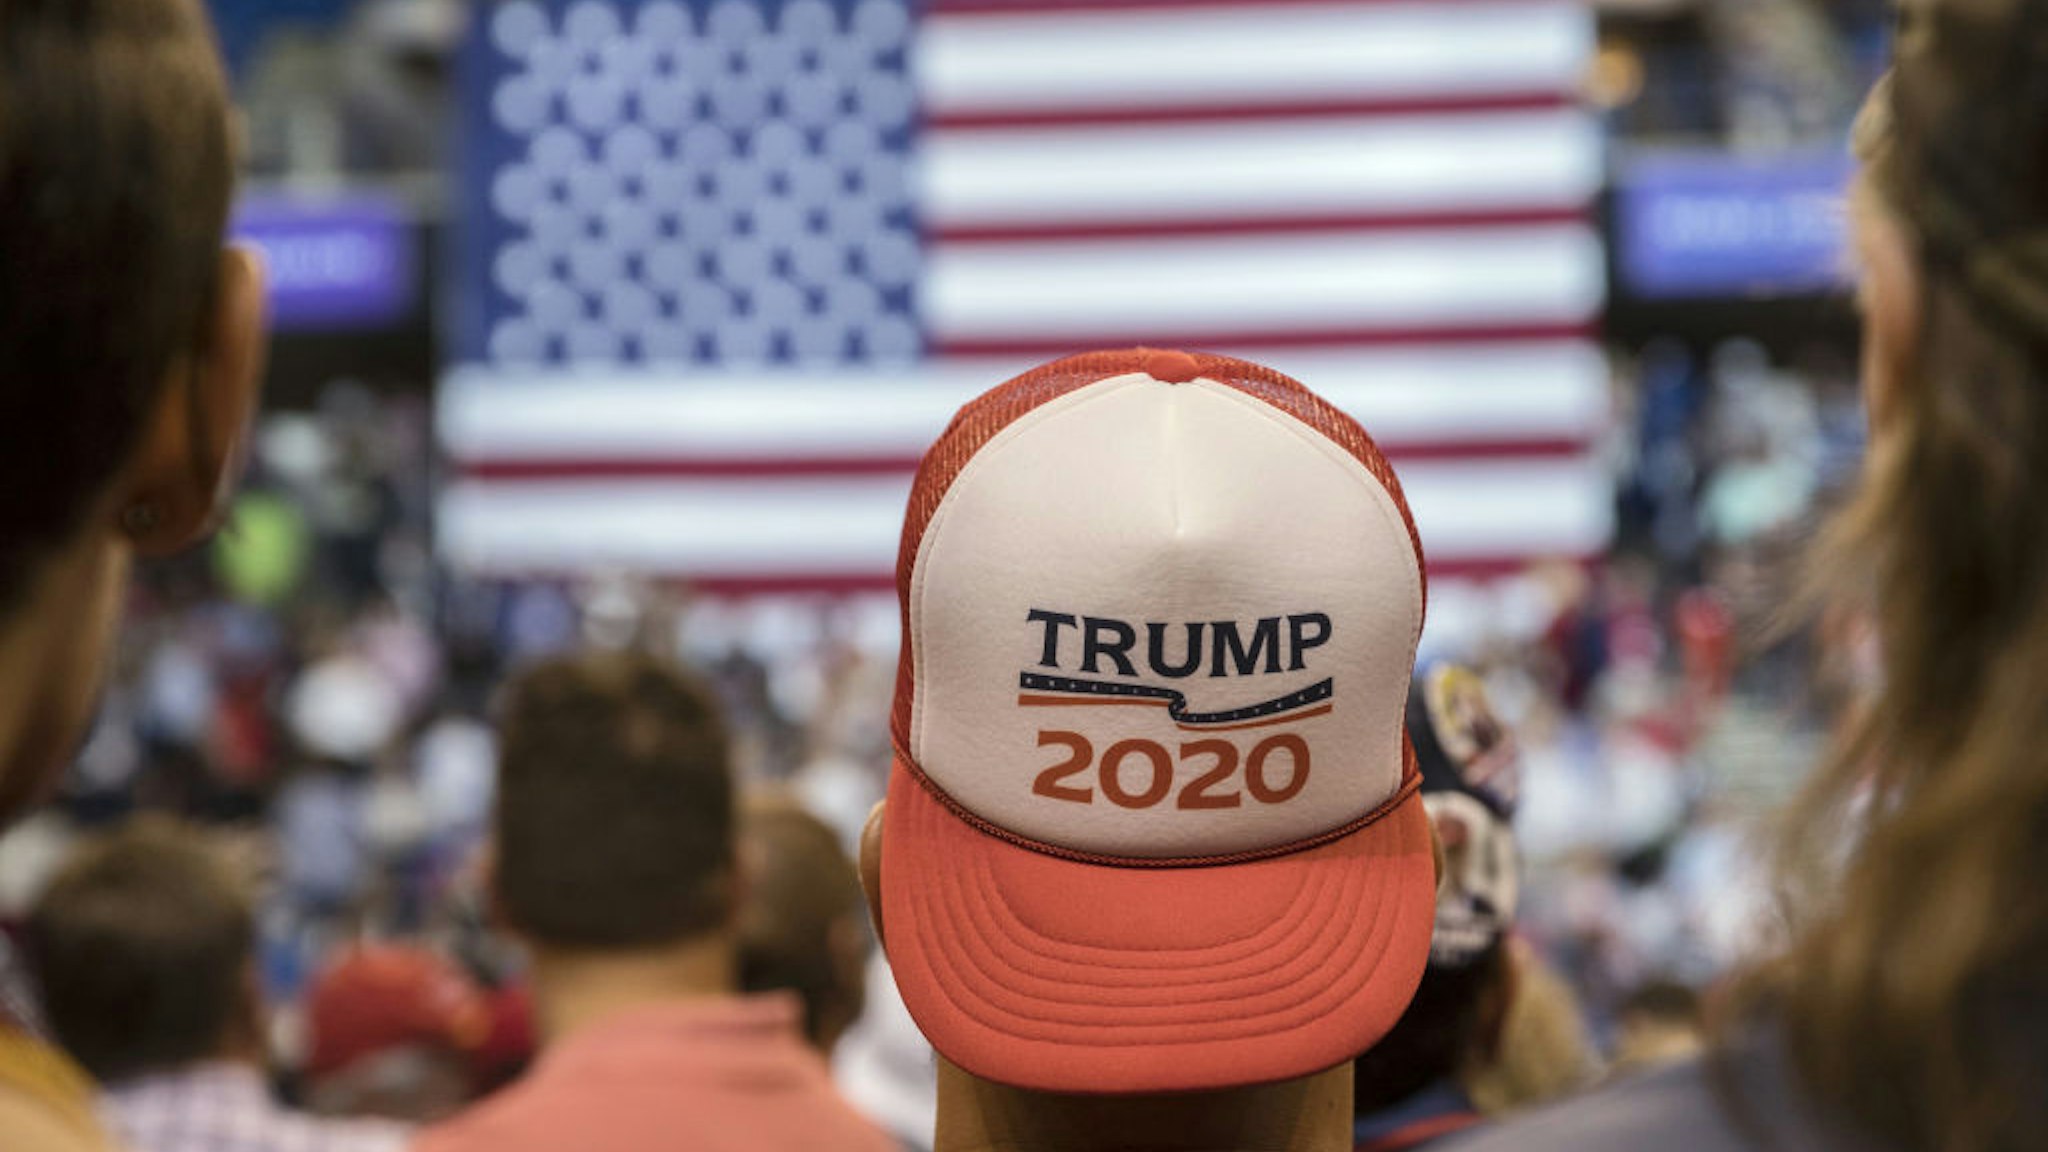 An attendee wears a "Trump 2020" hat before the start of a rally with U.S. President Donald Trump in Wilkes-Barre, Pennsylvania, U.S., on Thursday, Aug. 2, 2018.